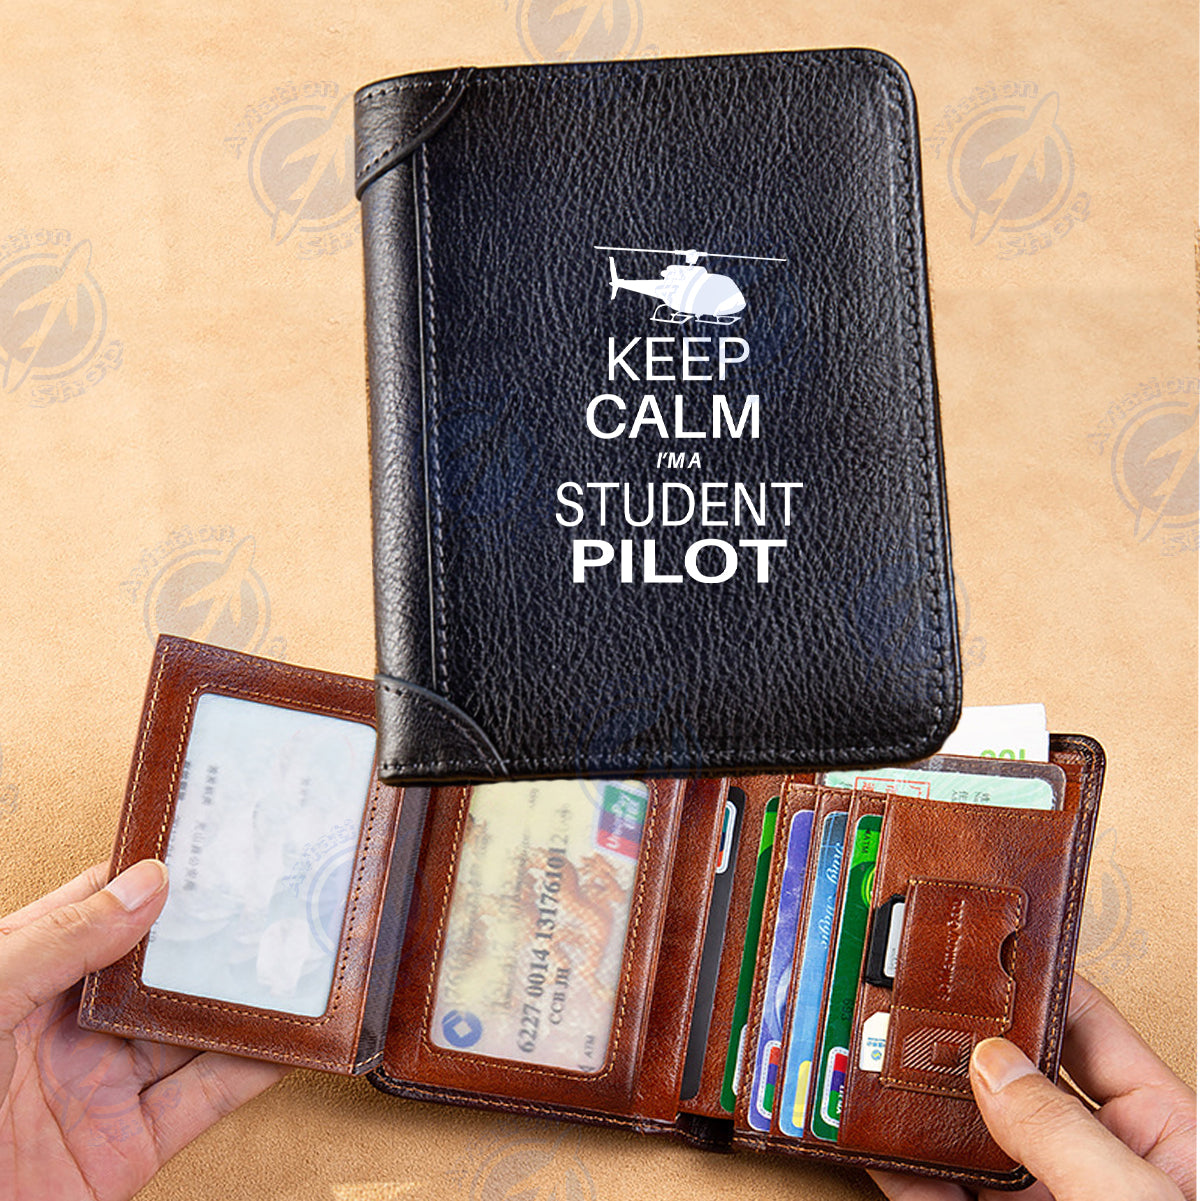 Student Pilot (Helicopter) Designed Leather Wallets